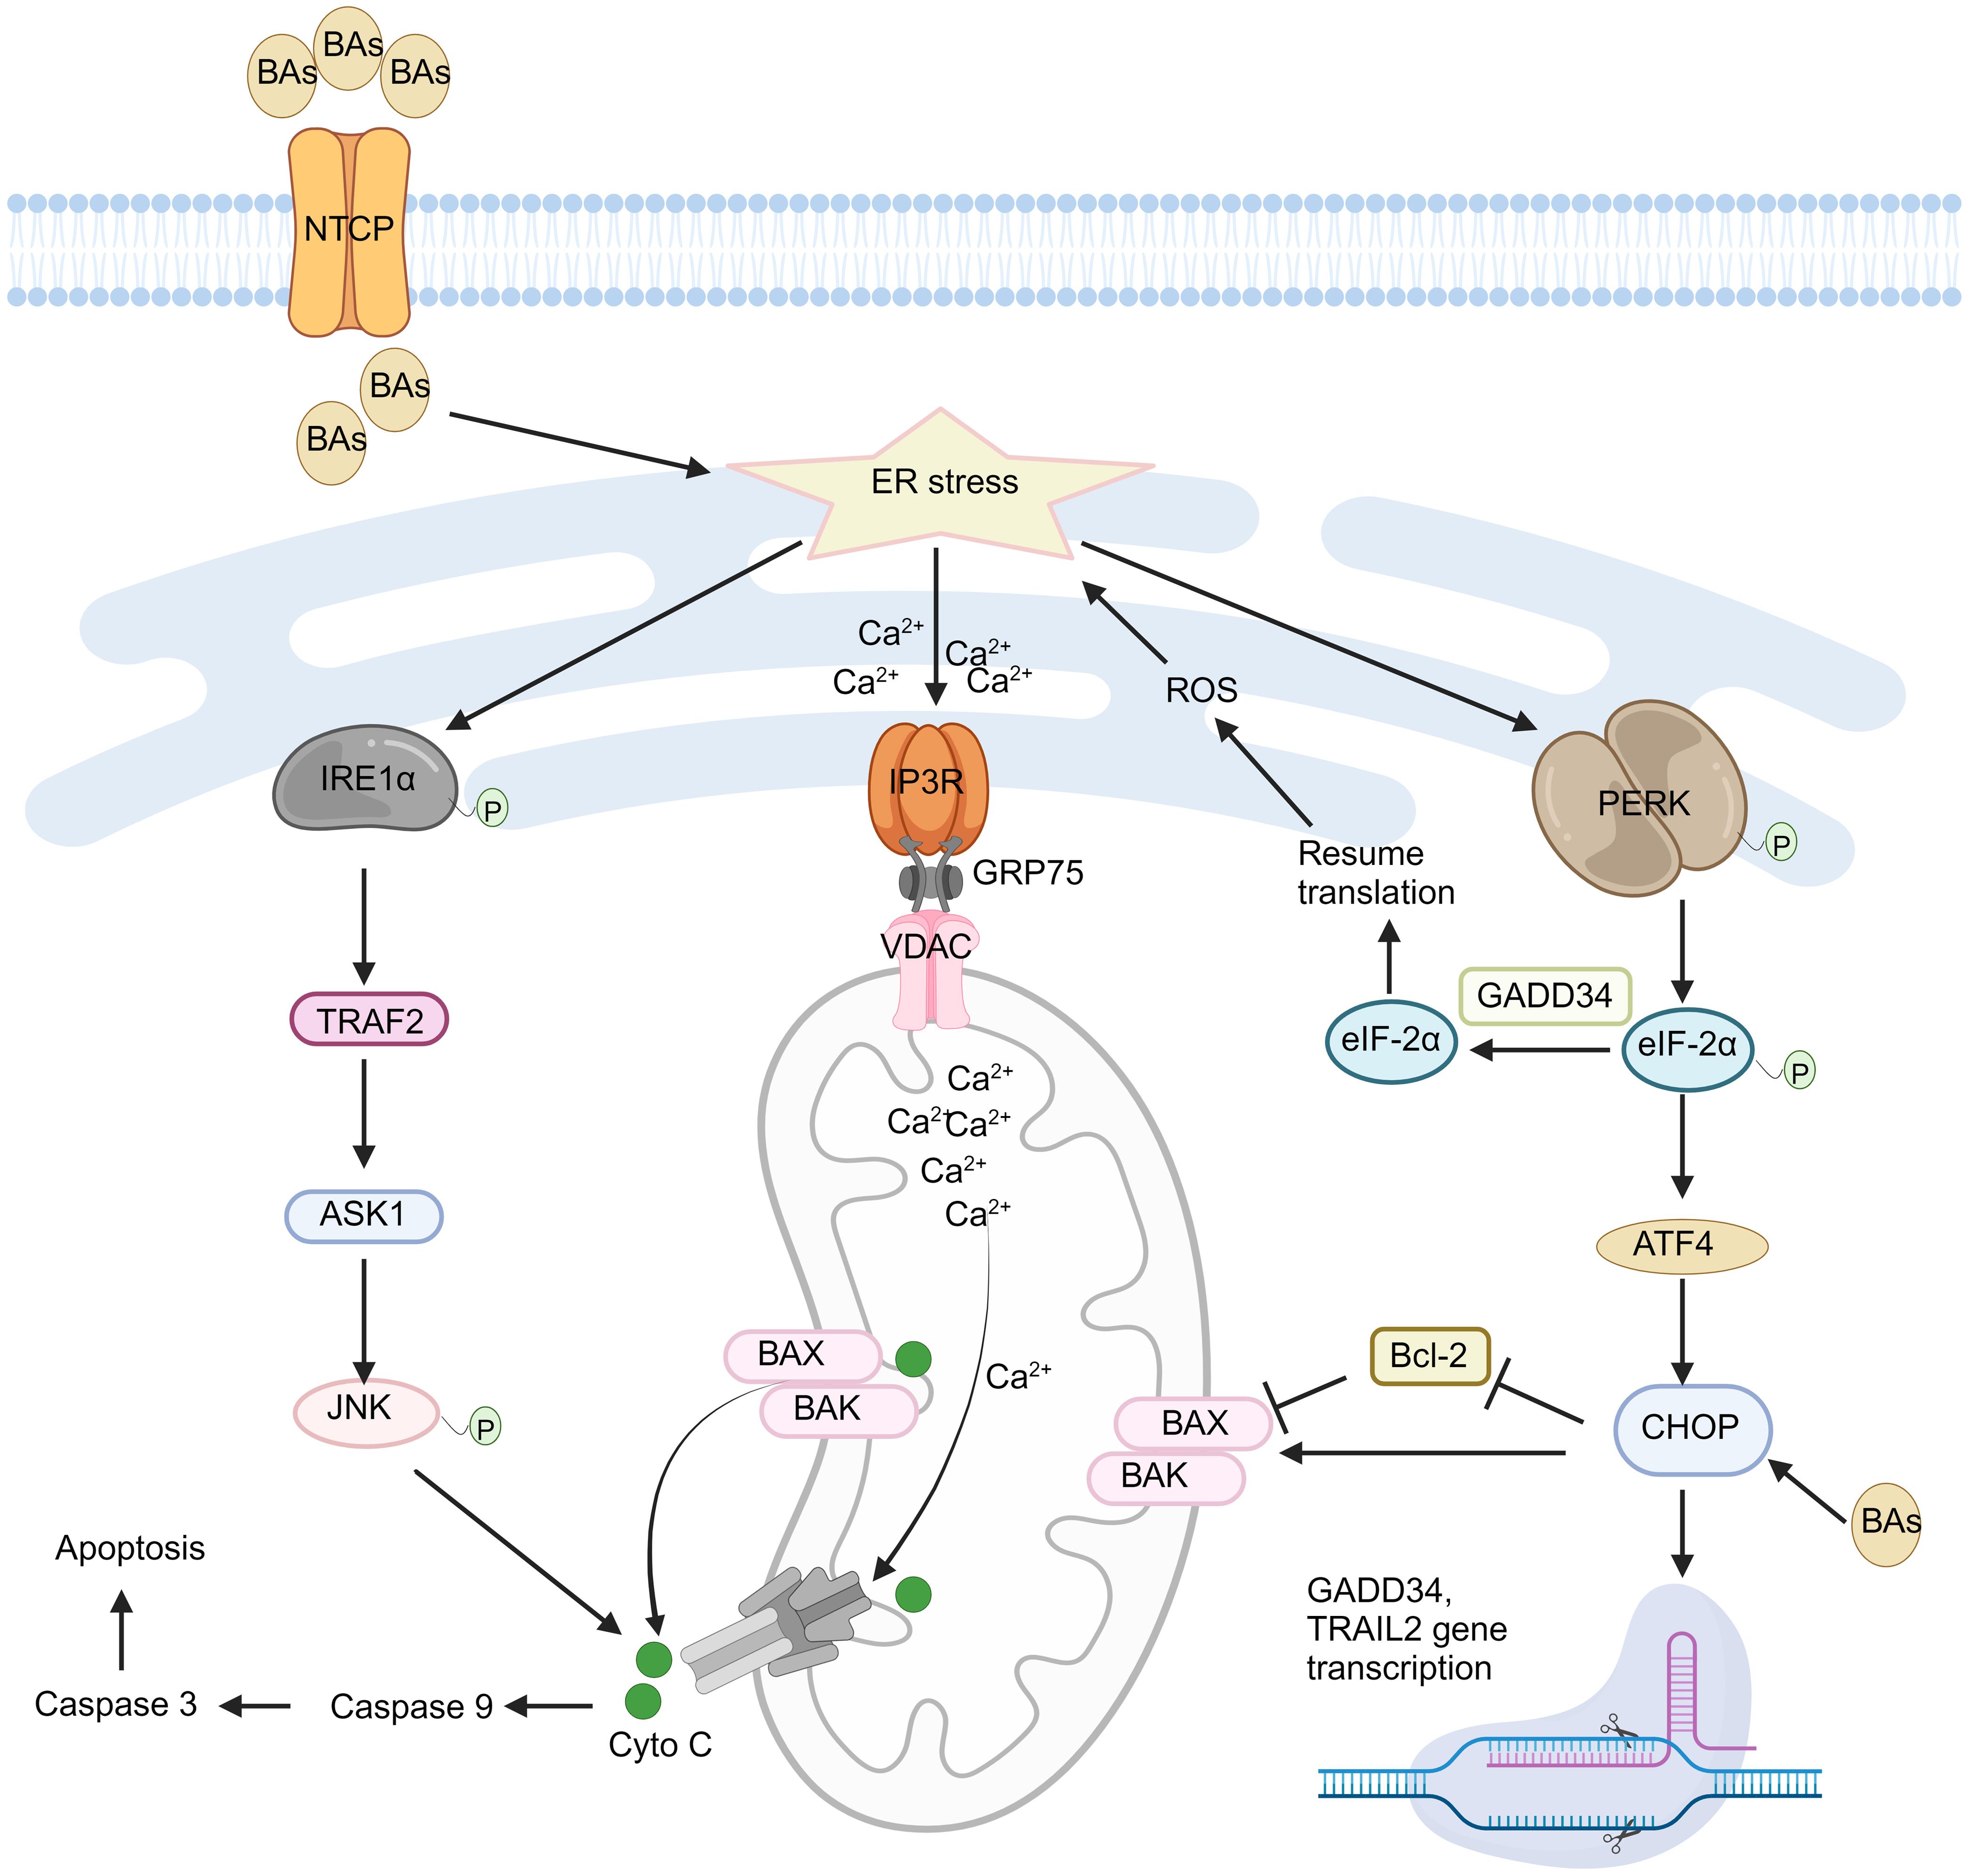 Pathways leading to apoptosis induced by ER stress are depicted, including ER calcium release, activation of JNK, upregulation of pro-apoptotic BCL-2 family members, ROS production, and the proapoptotic transcription factor CHOP.